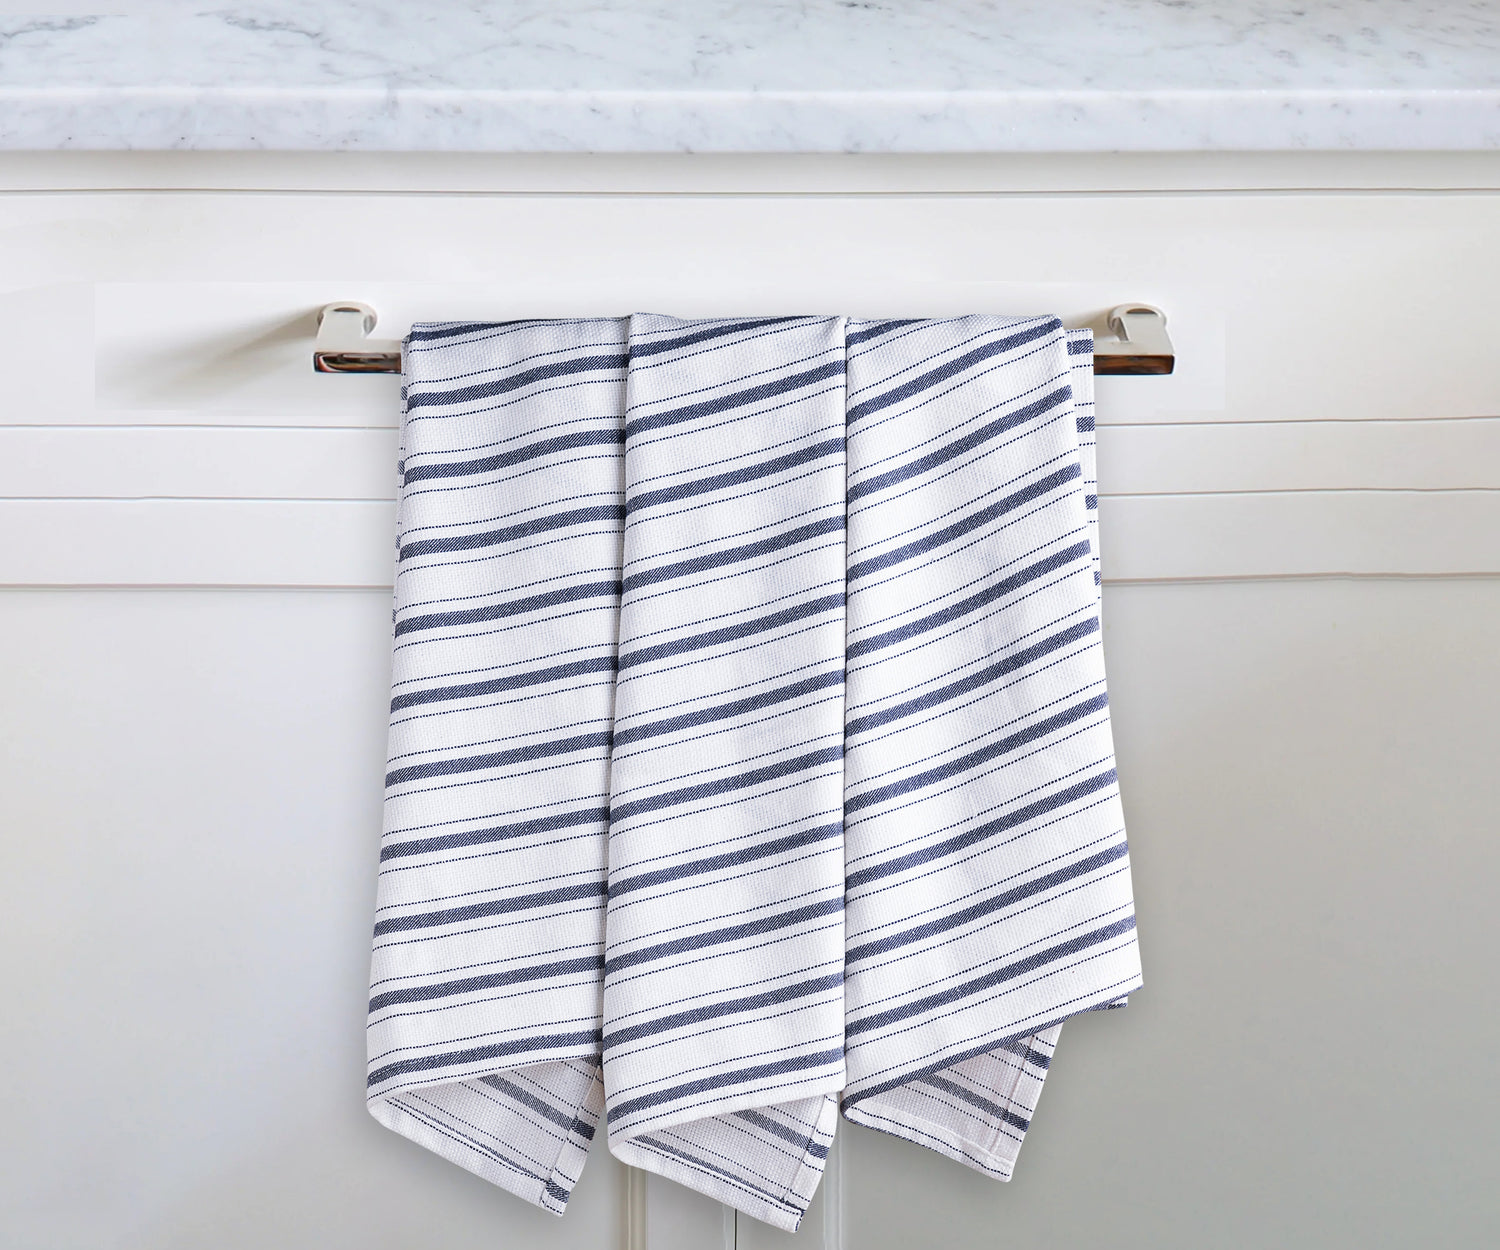 How to Wash Dish Towels 